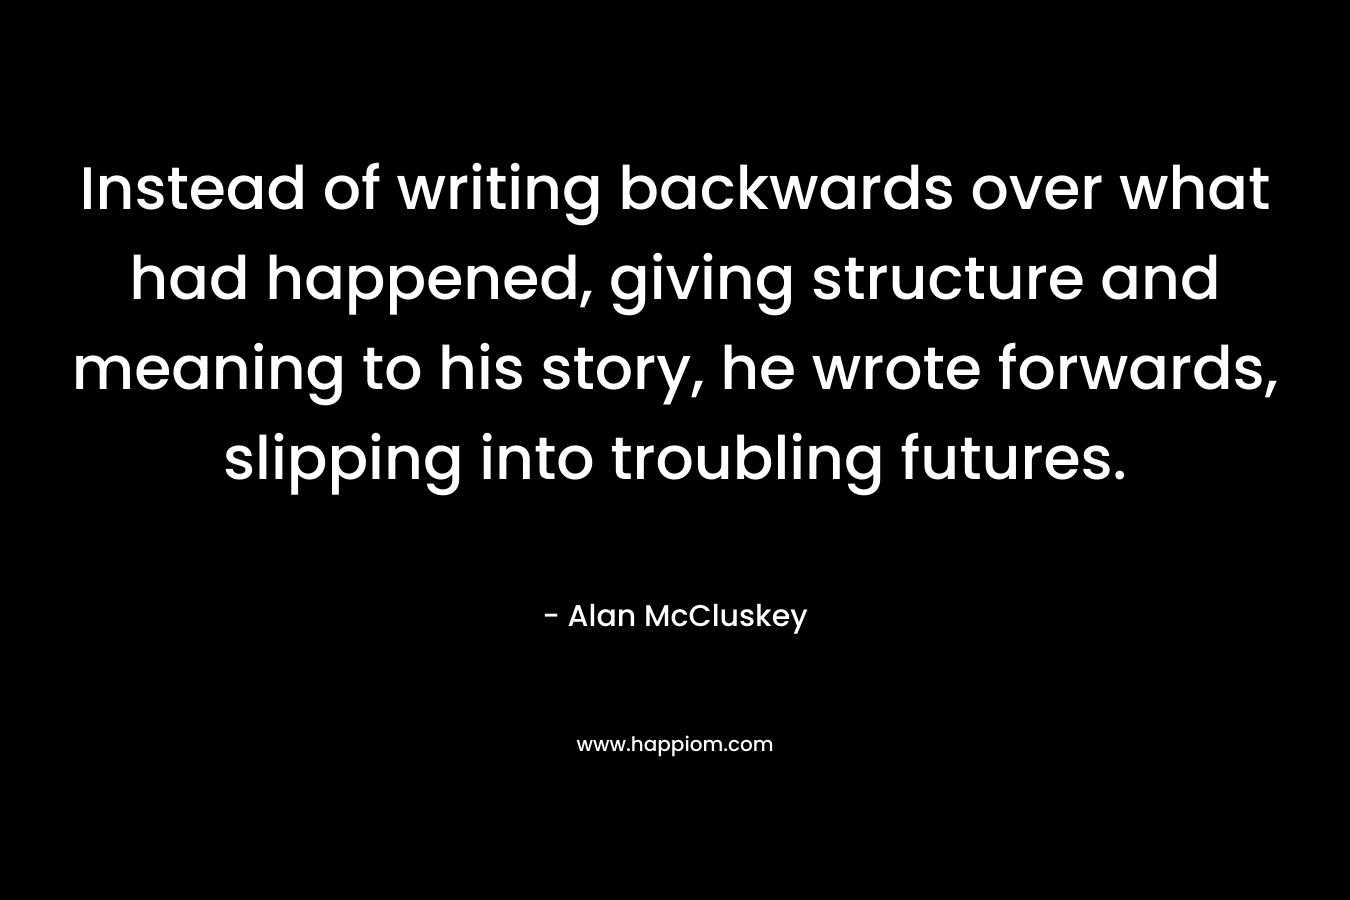 Instead of writing backwards over what had happened, giving structure and meaning to his story, he wrote forwards, slipping into troubling futures. – Alan McCluskey